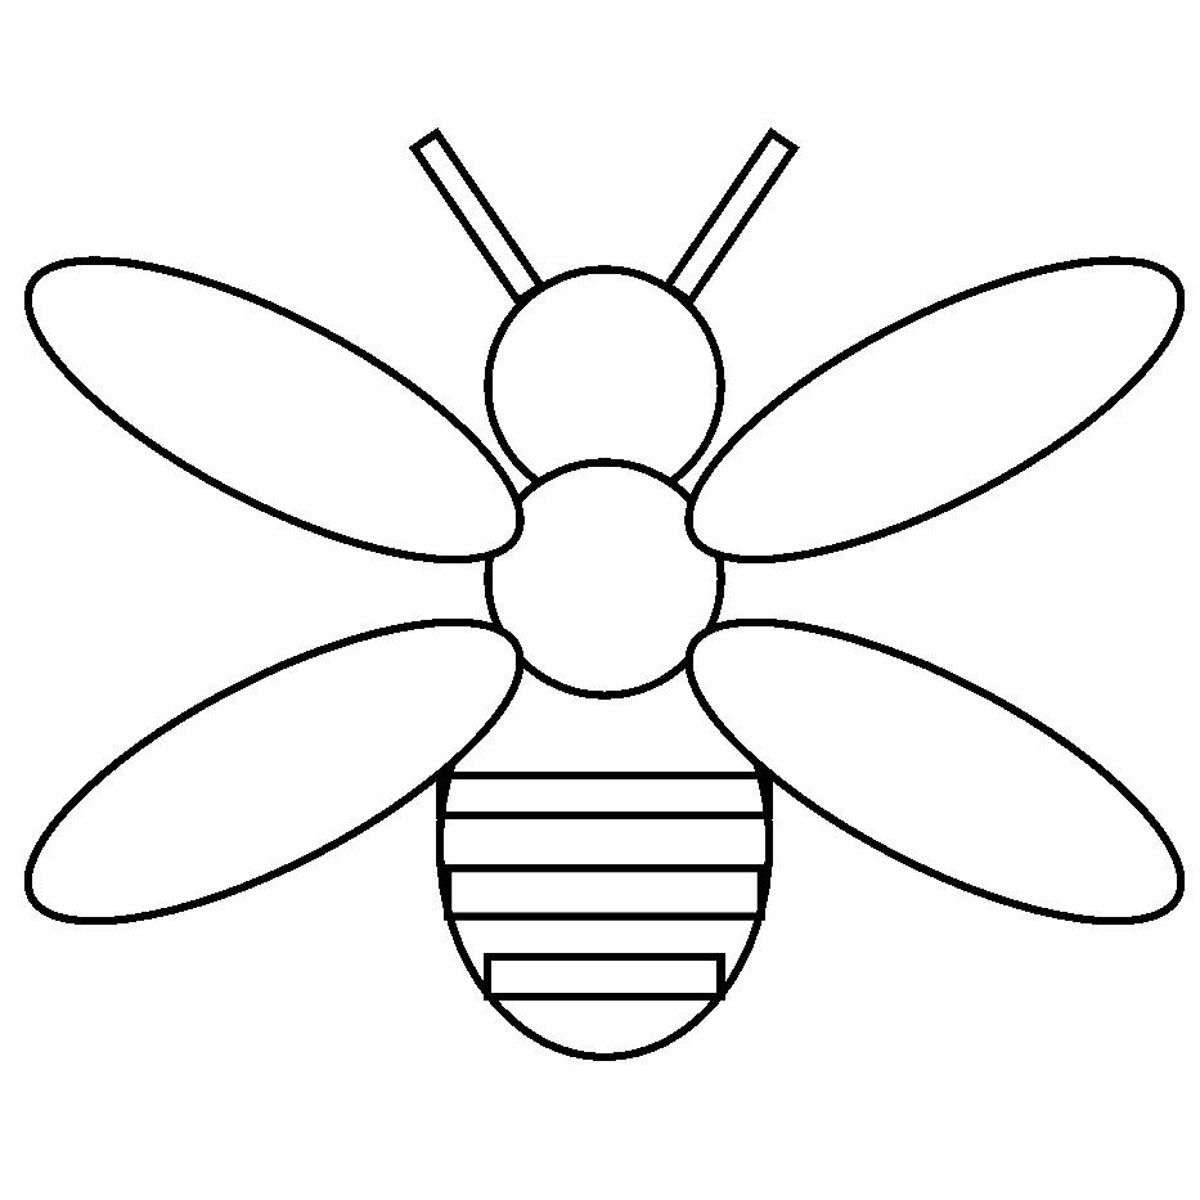 Insect coloring pages to print - Coloring Pages  Pictures - IMAGIXS